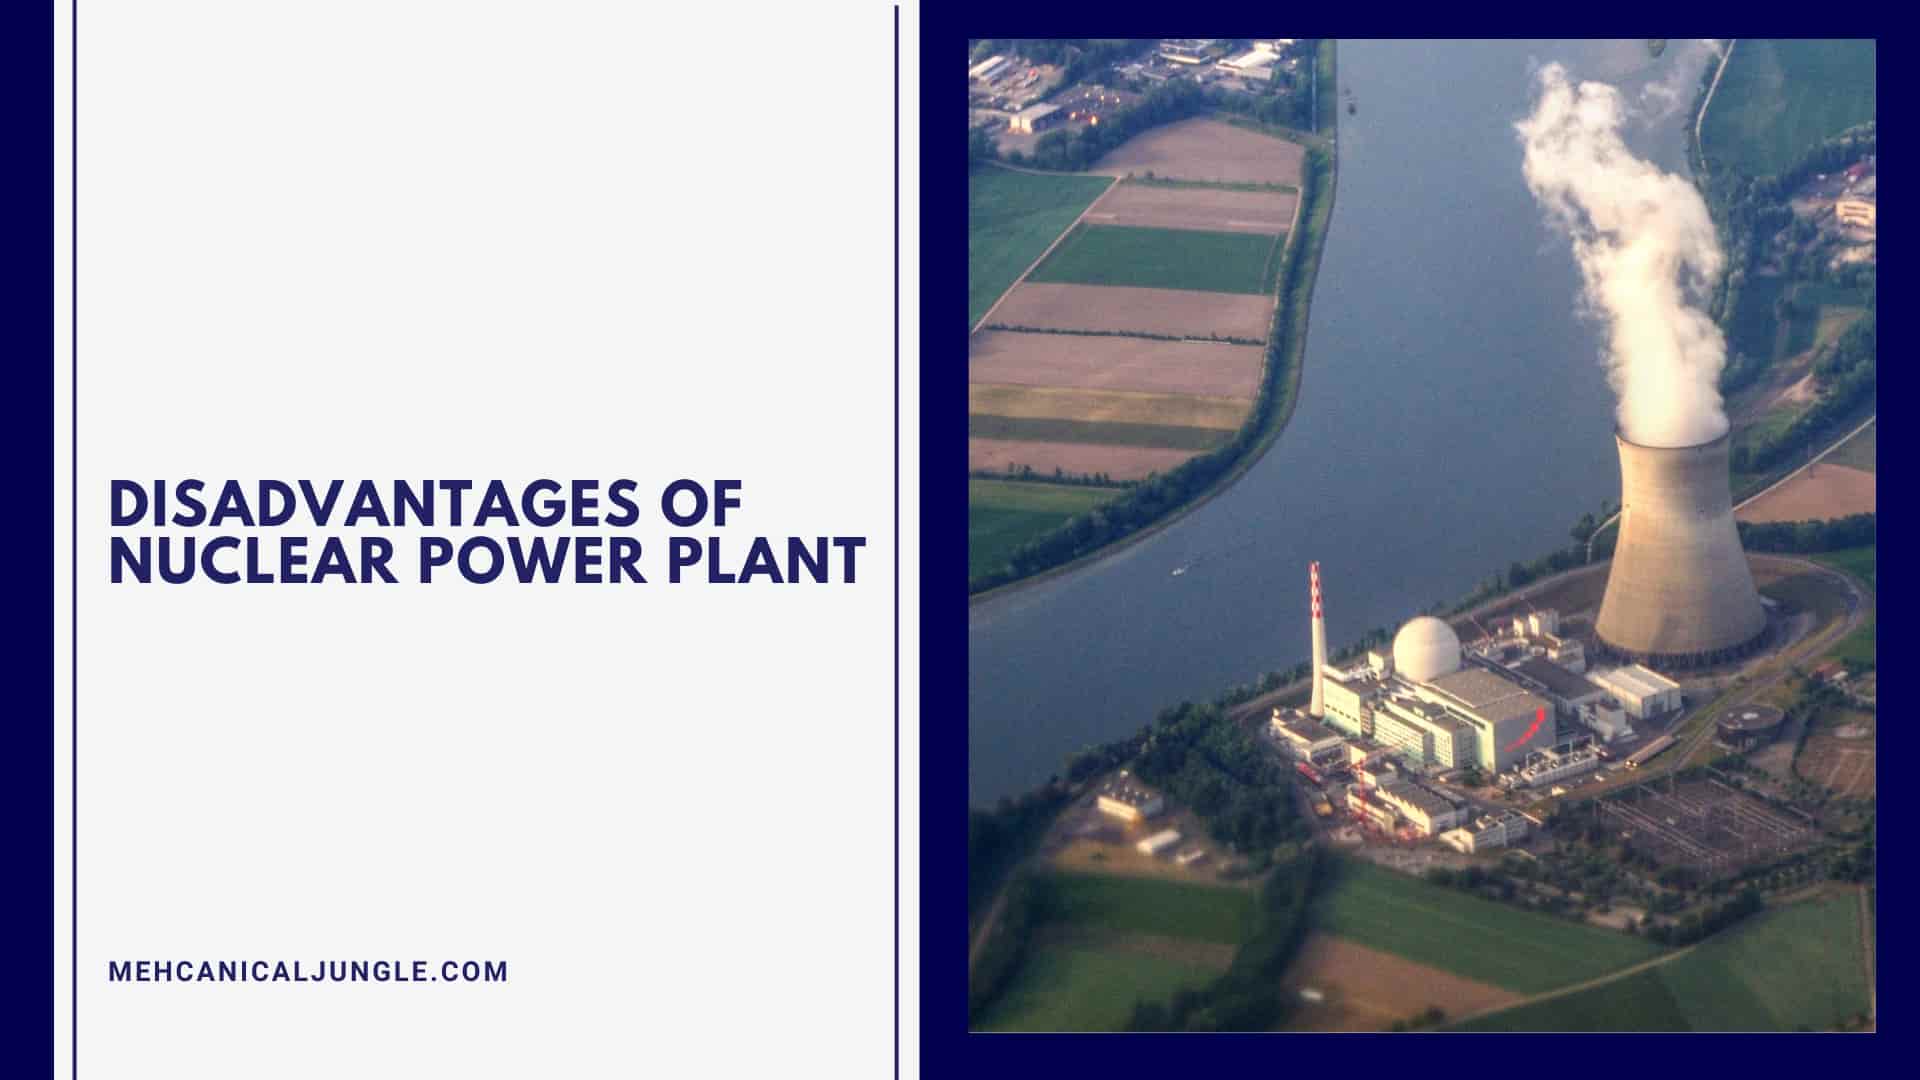 Disadvantages of Nuclear Power Plant